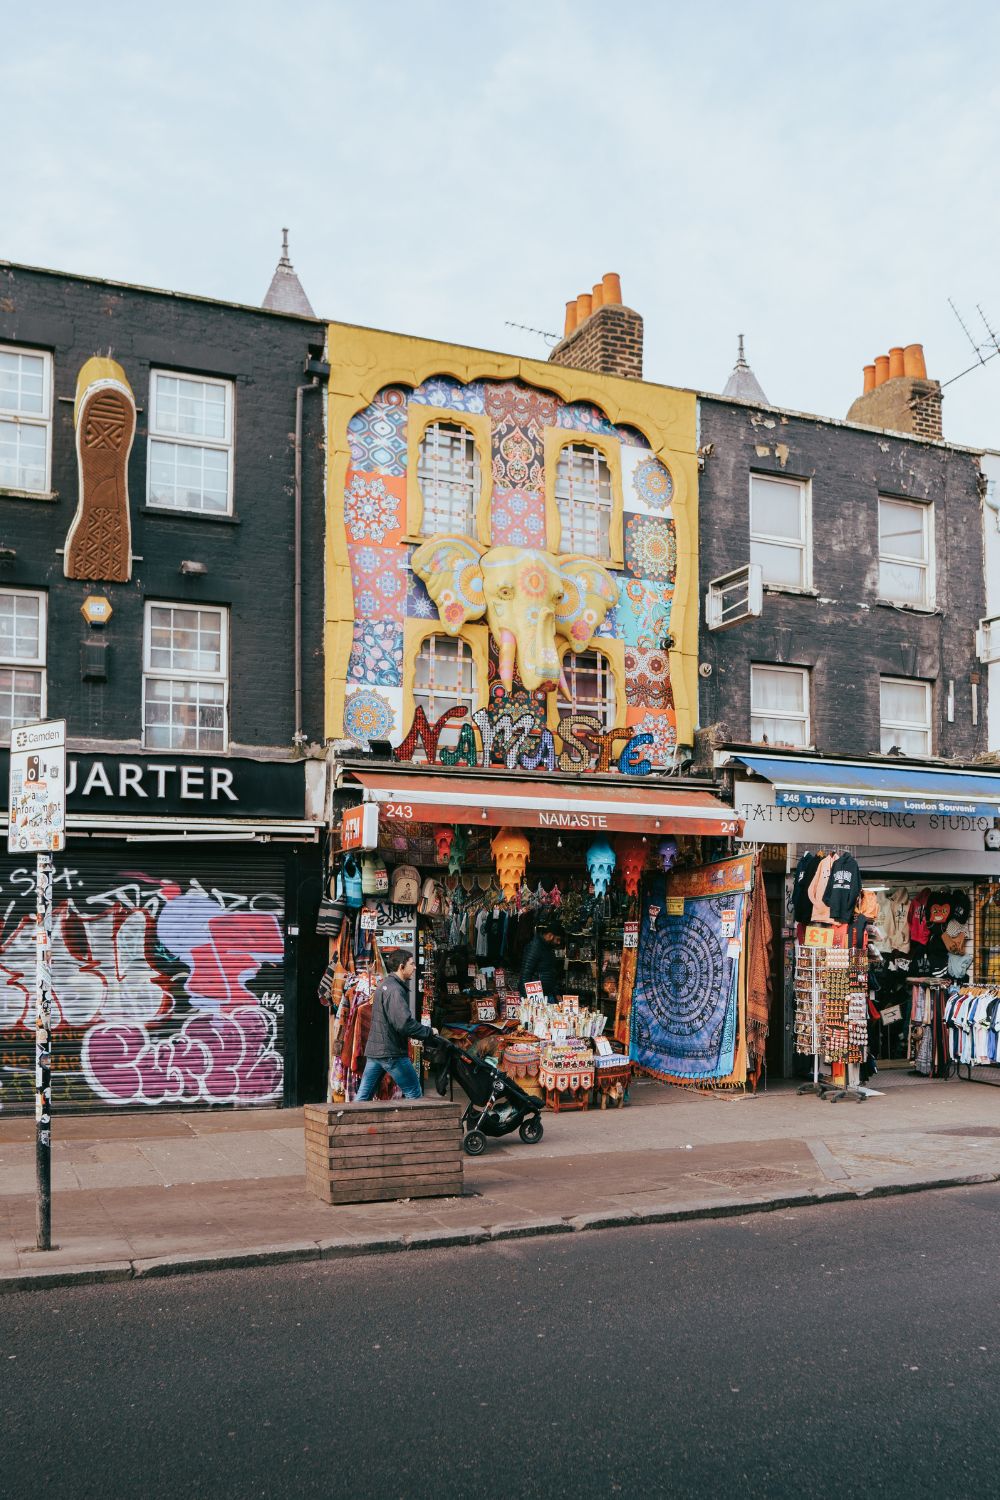 Visit The Quirky Camden Market On your 8-Hour London Layover